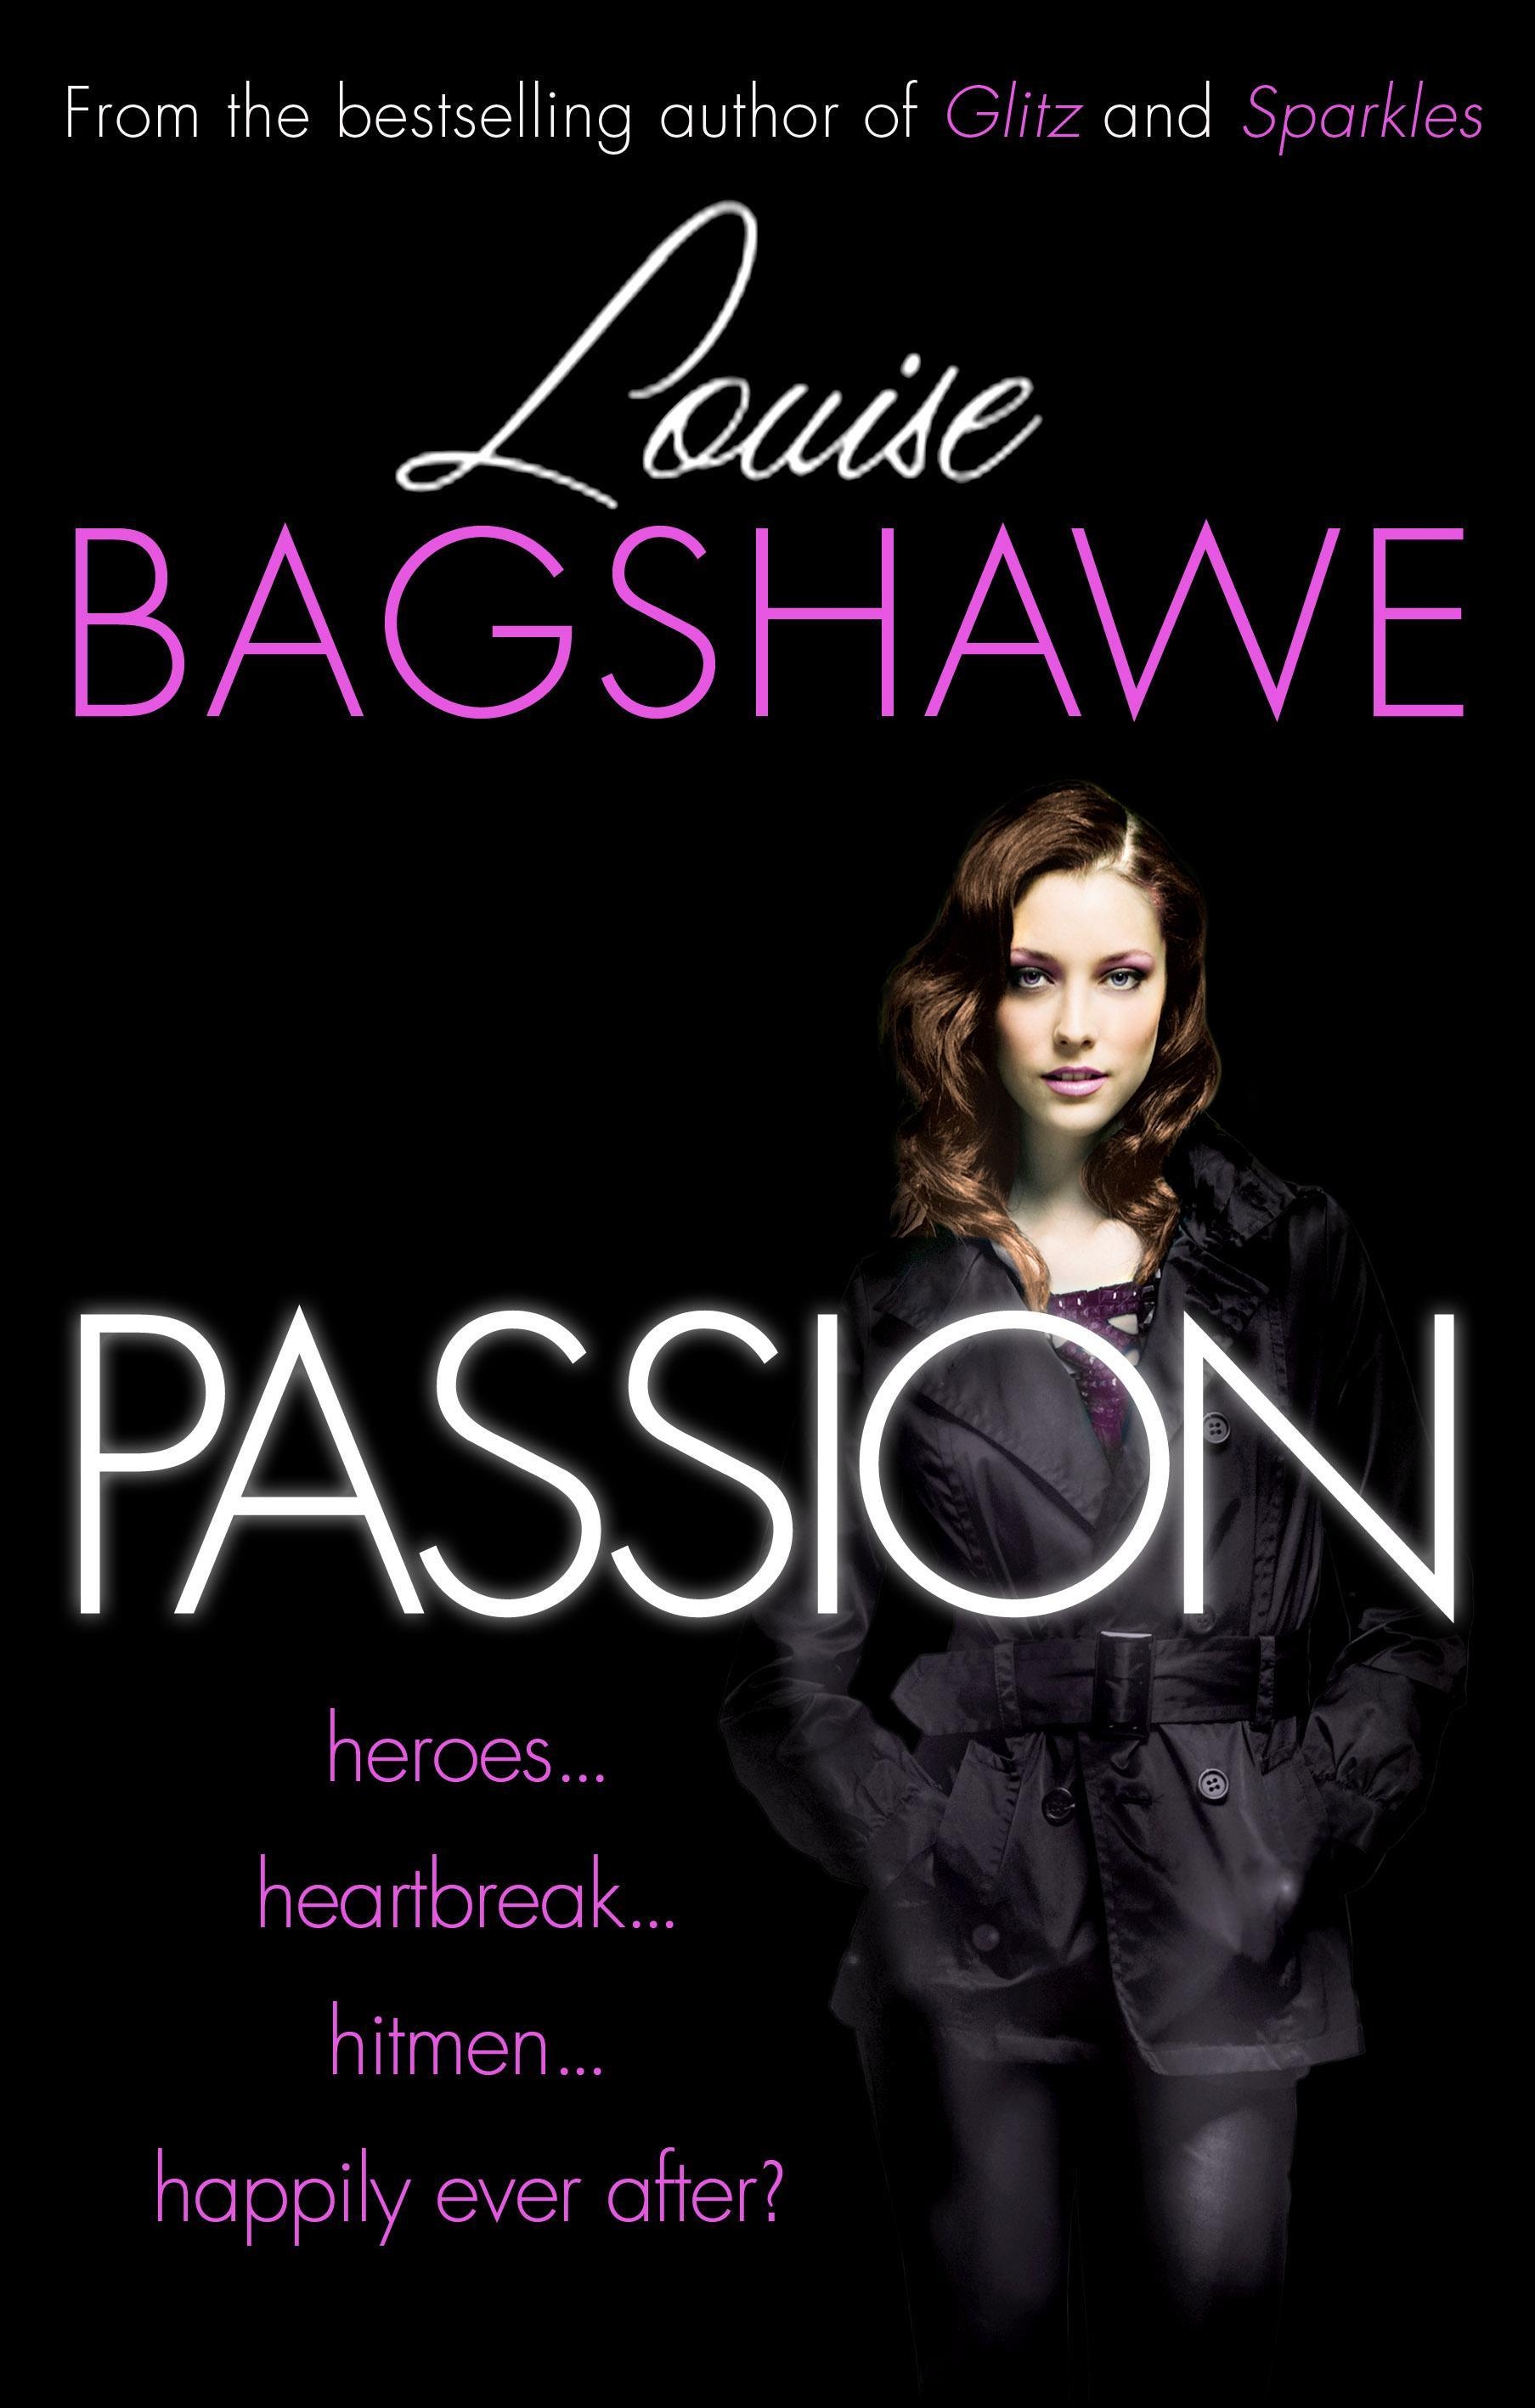 Passion by Louise Bagshawe | Headline Publishing Group, home of bestselling fiction and non ...